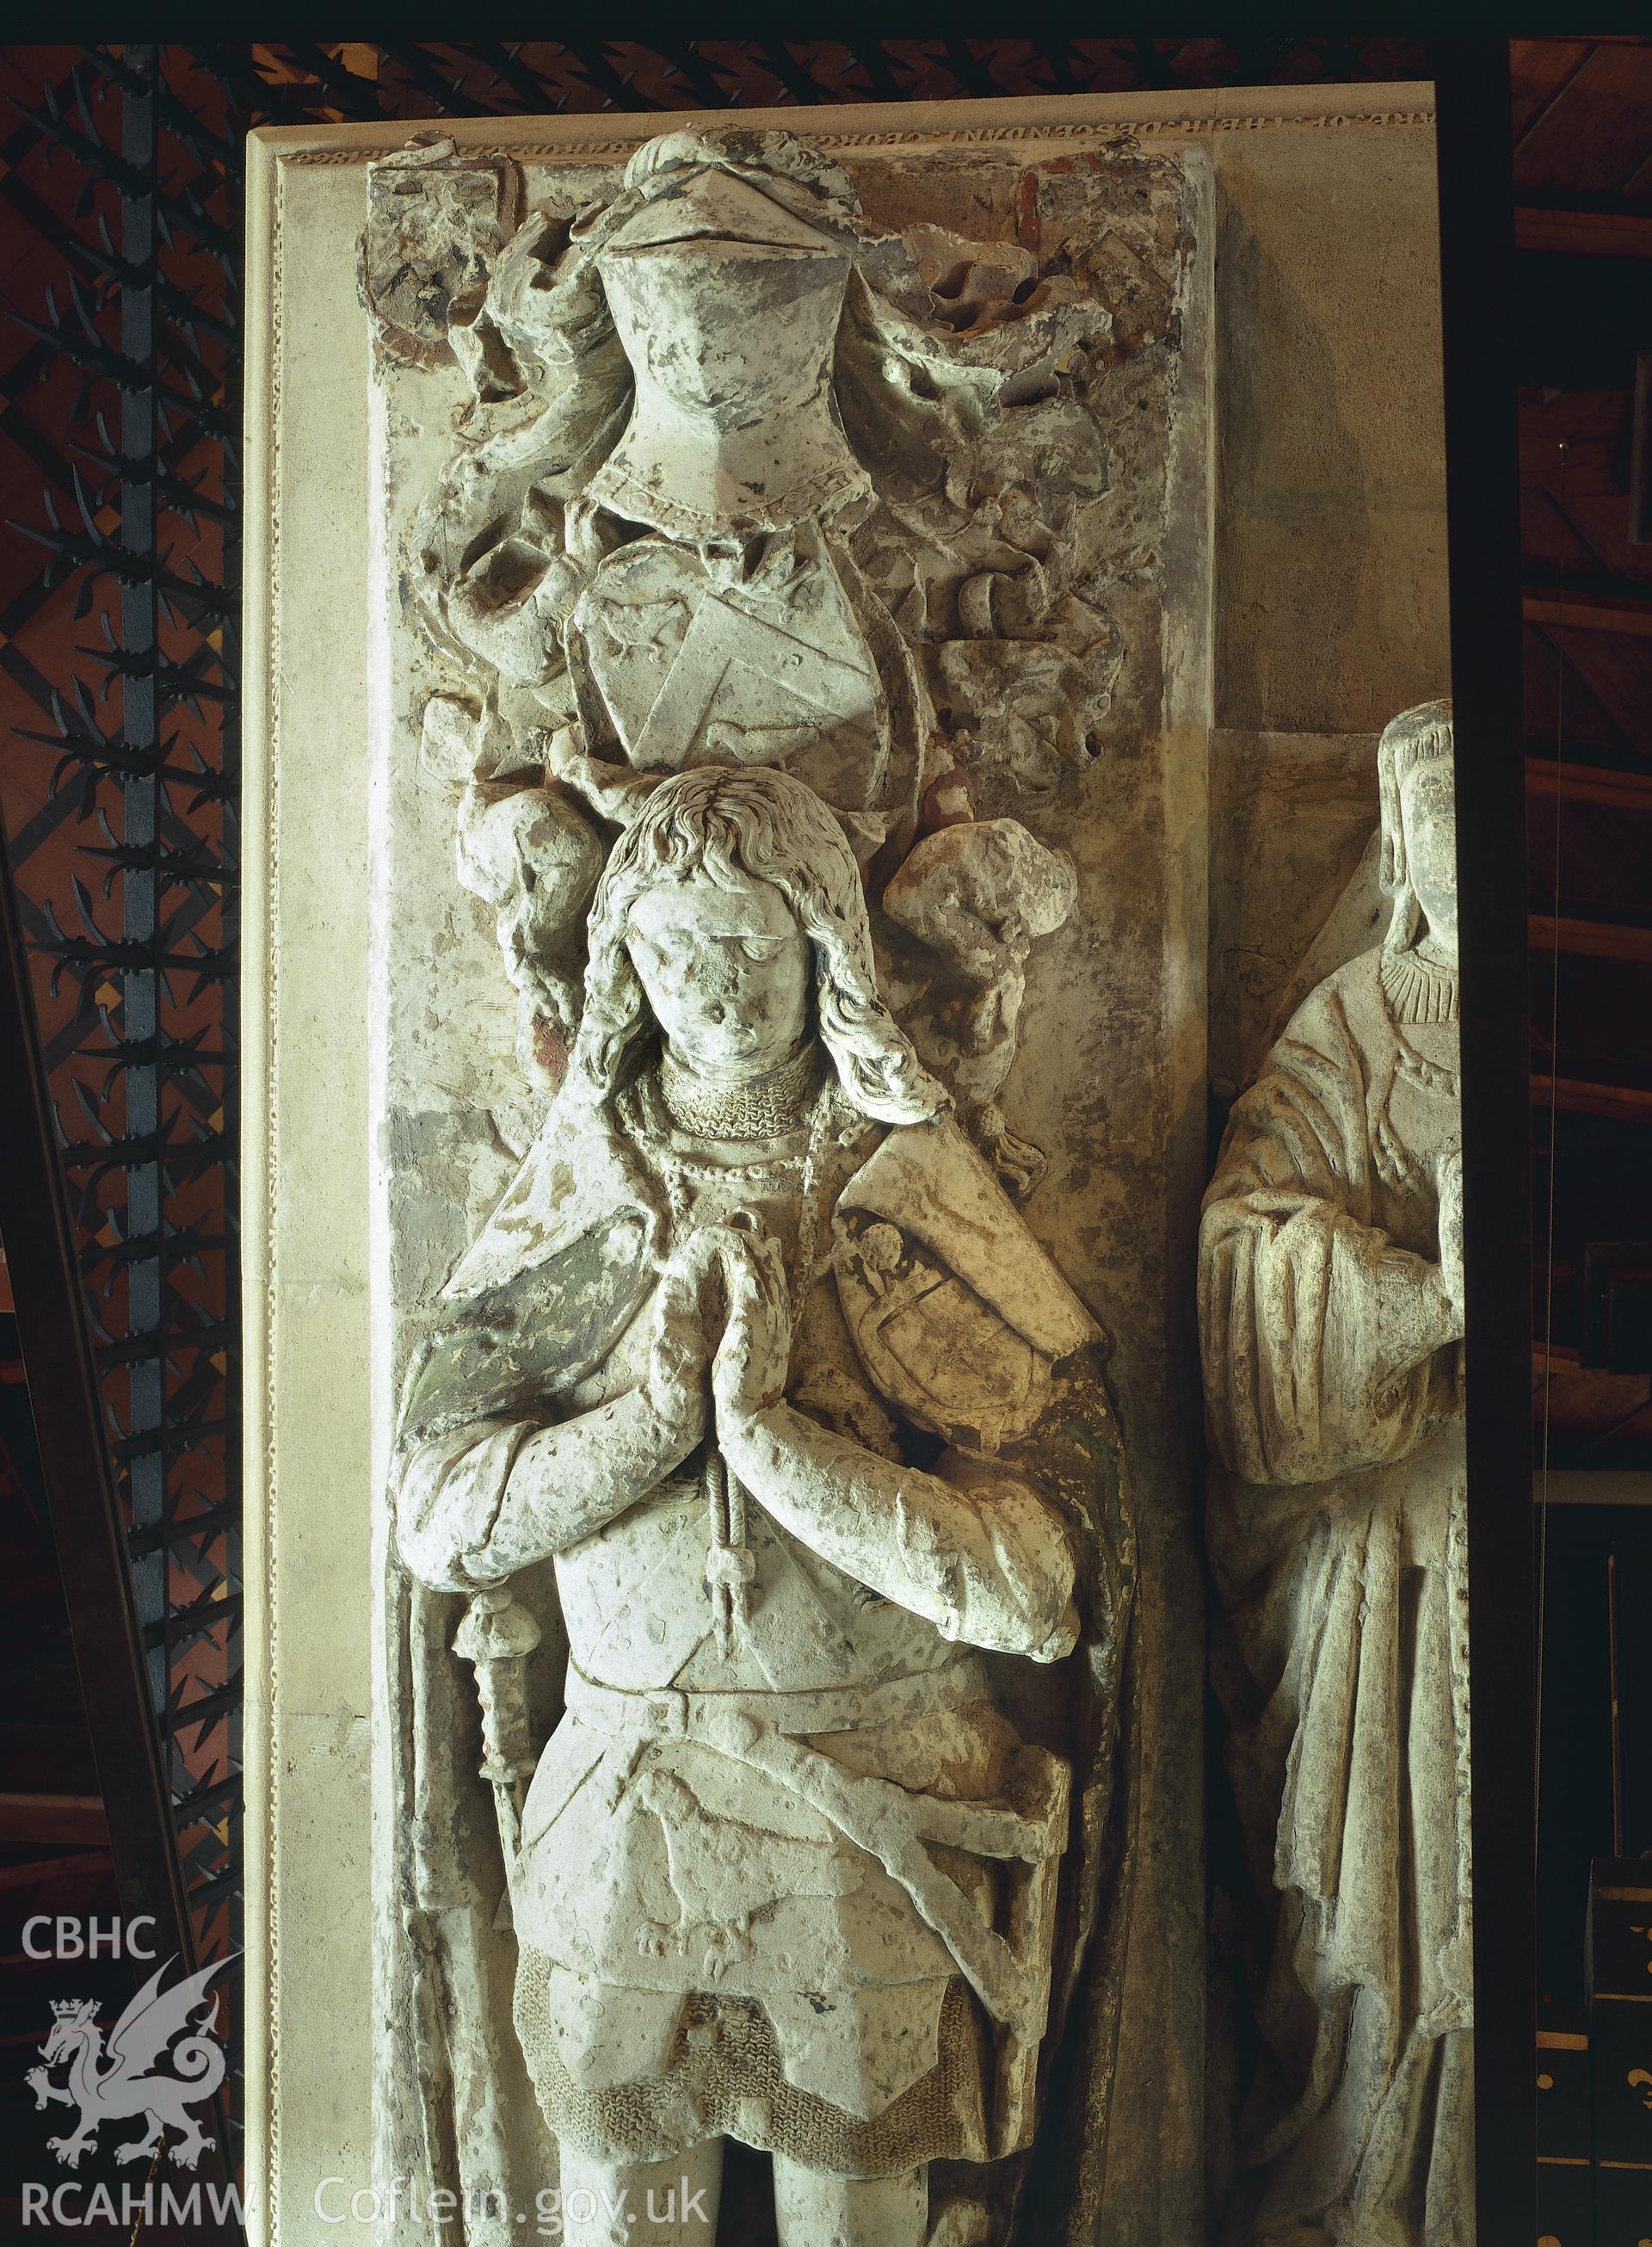 RCAHMW colour transparency showing detail of a monument to Sir Rhys ap Thomas, in St Peter's Church, Carmarthen.